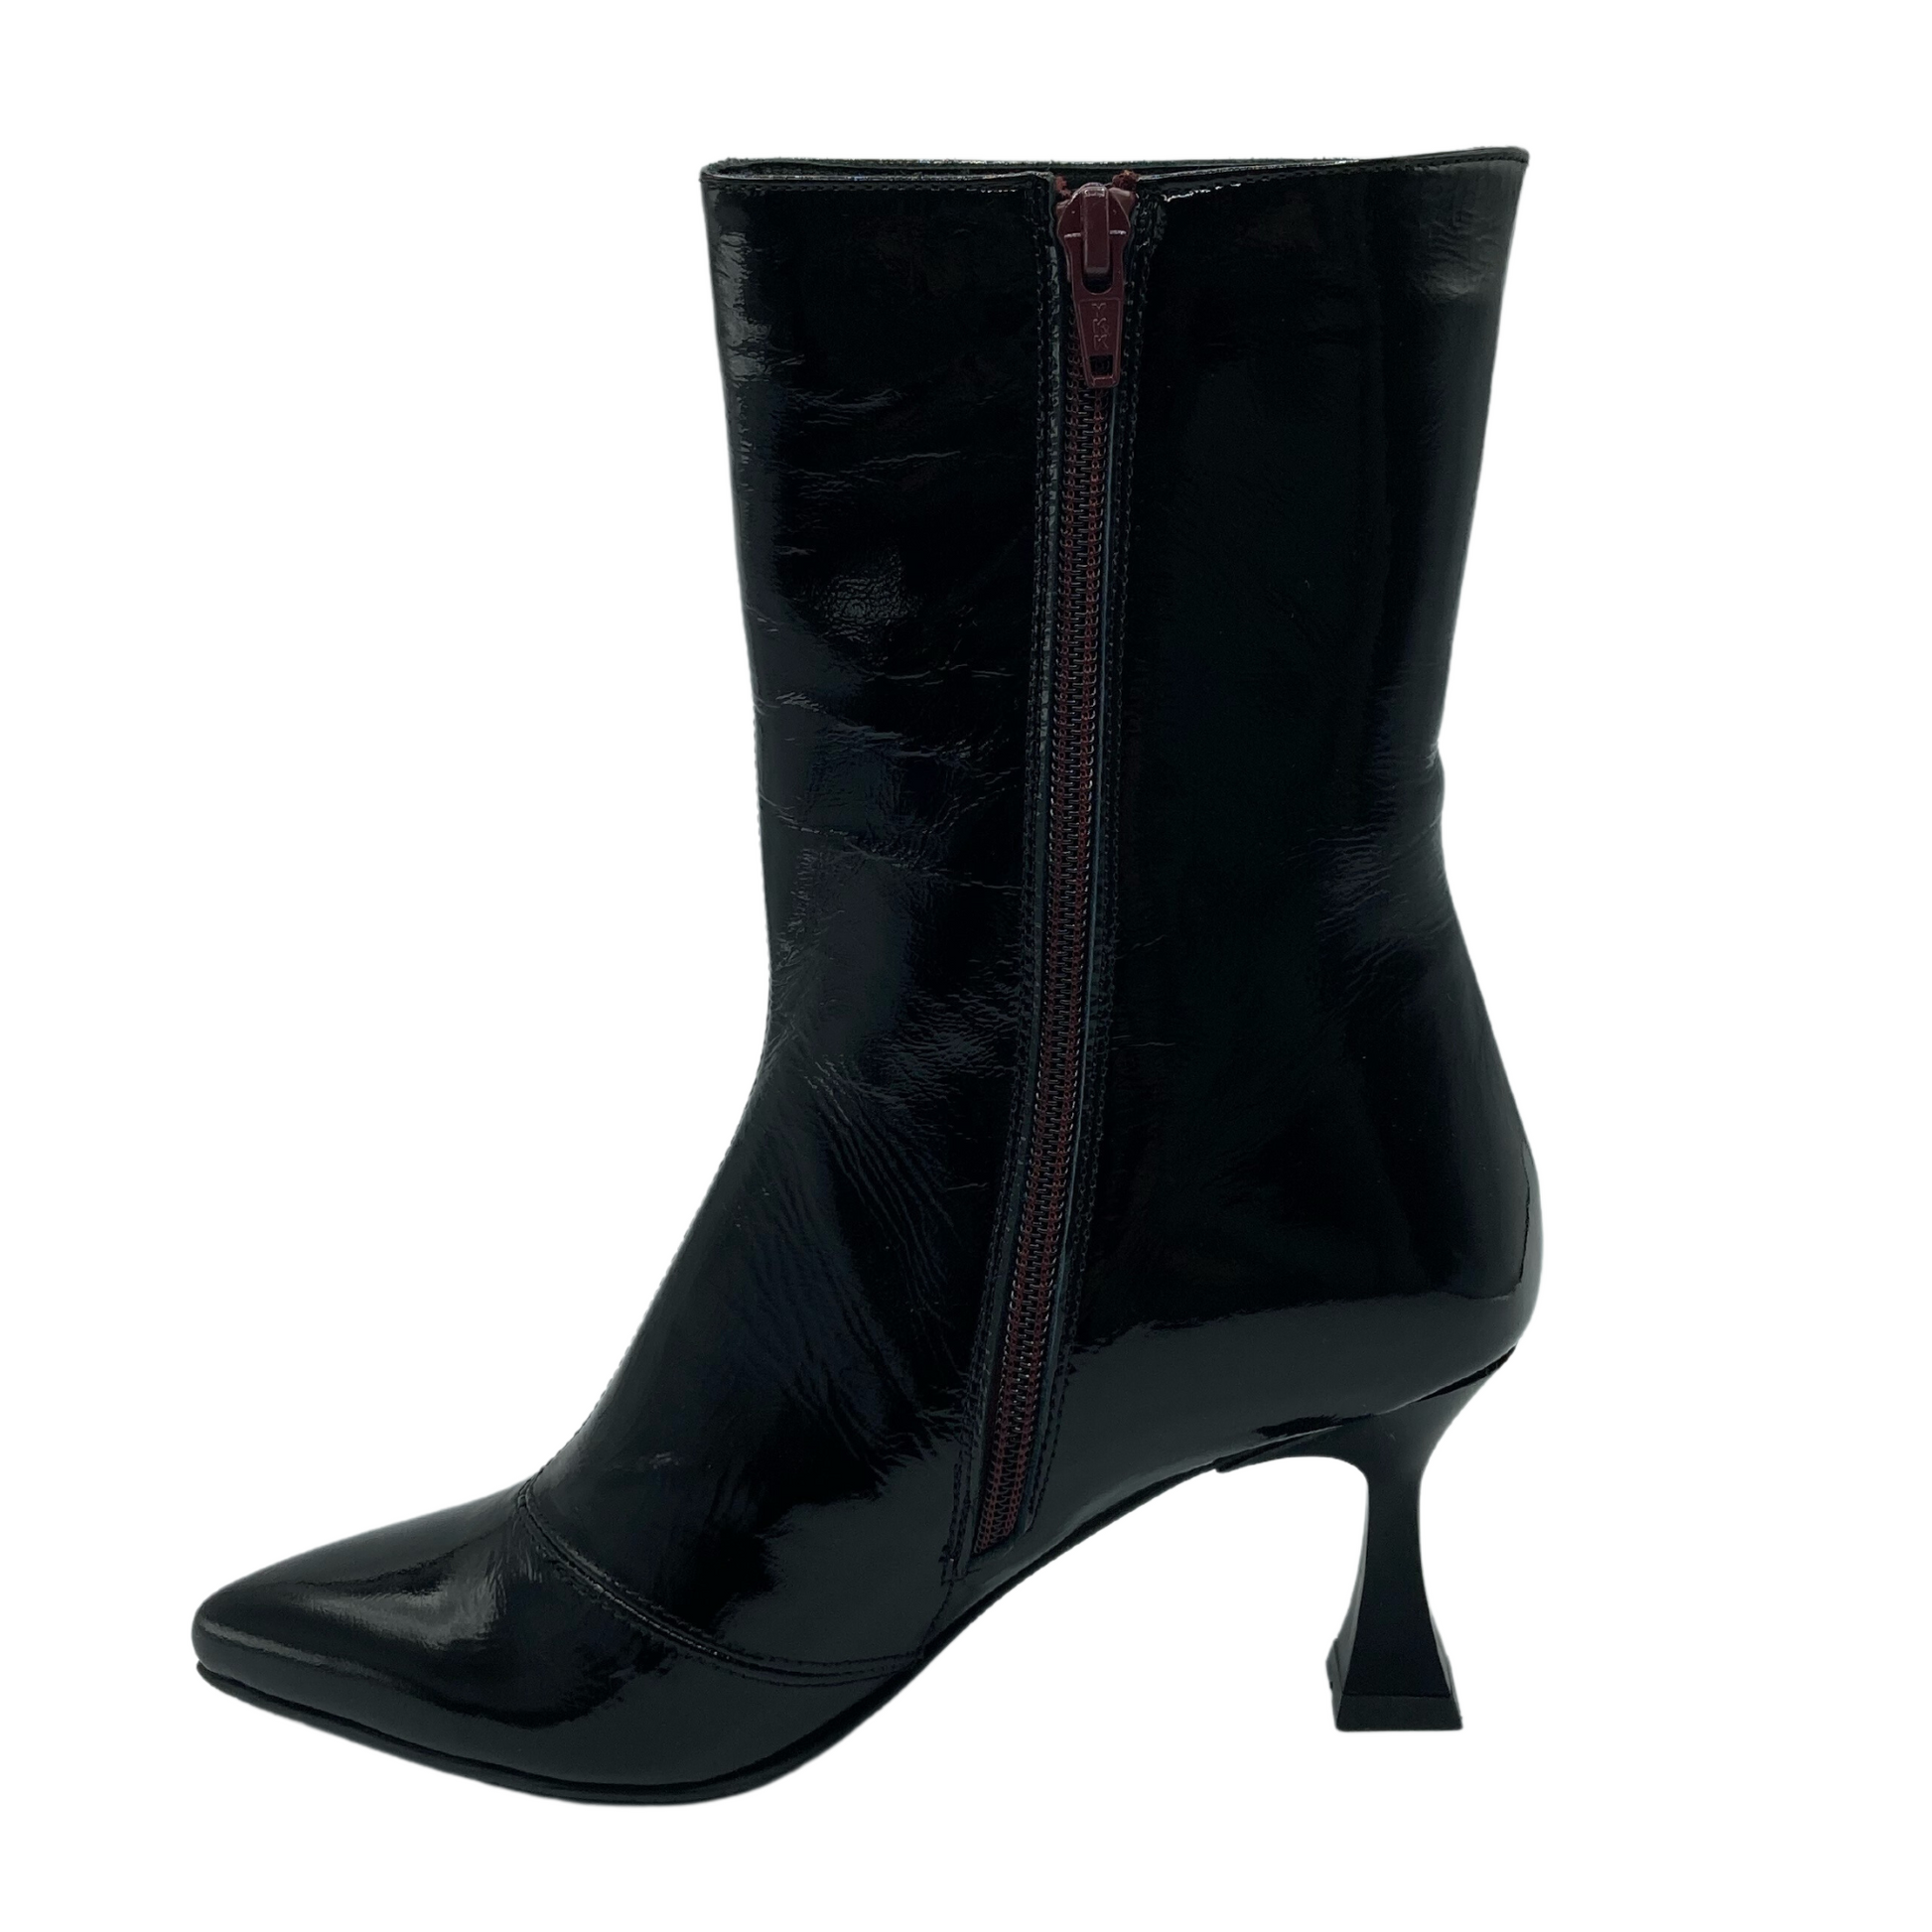 Left facing view of patent leather short boot with side zipper closure, flared heel and pointed toe